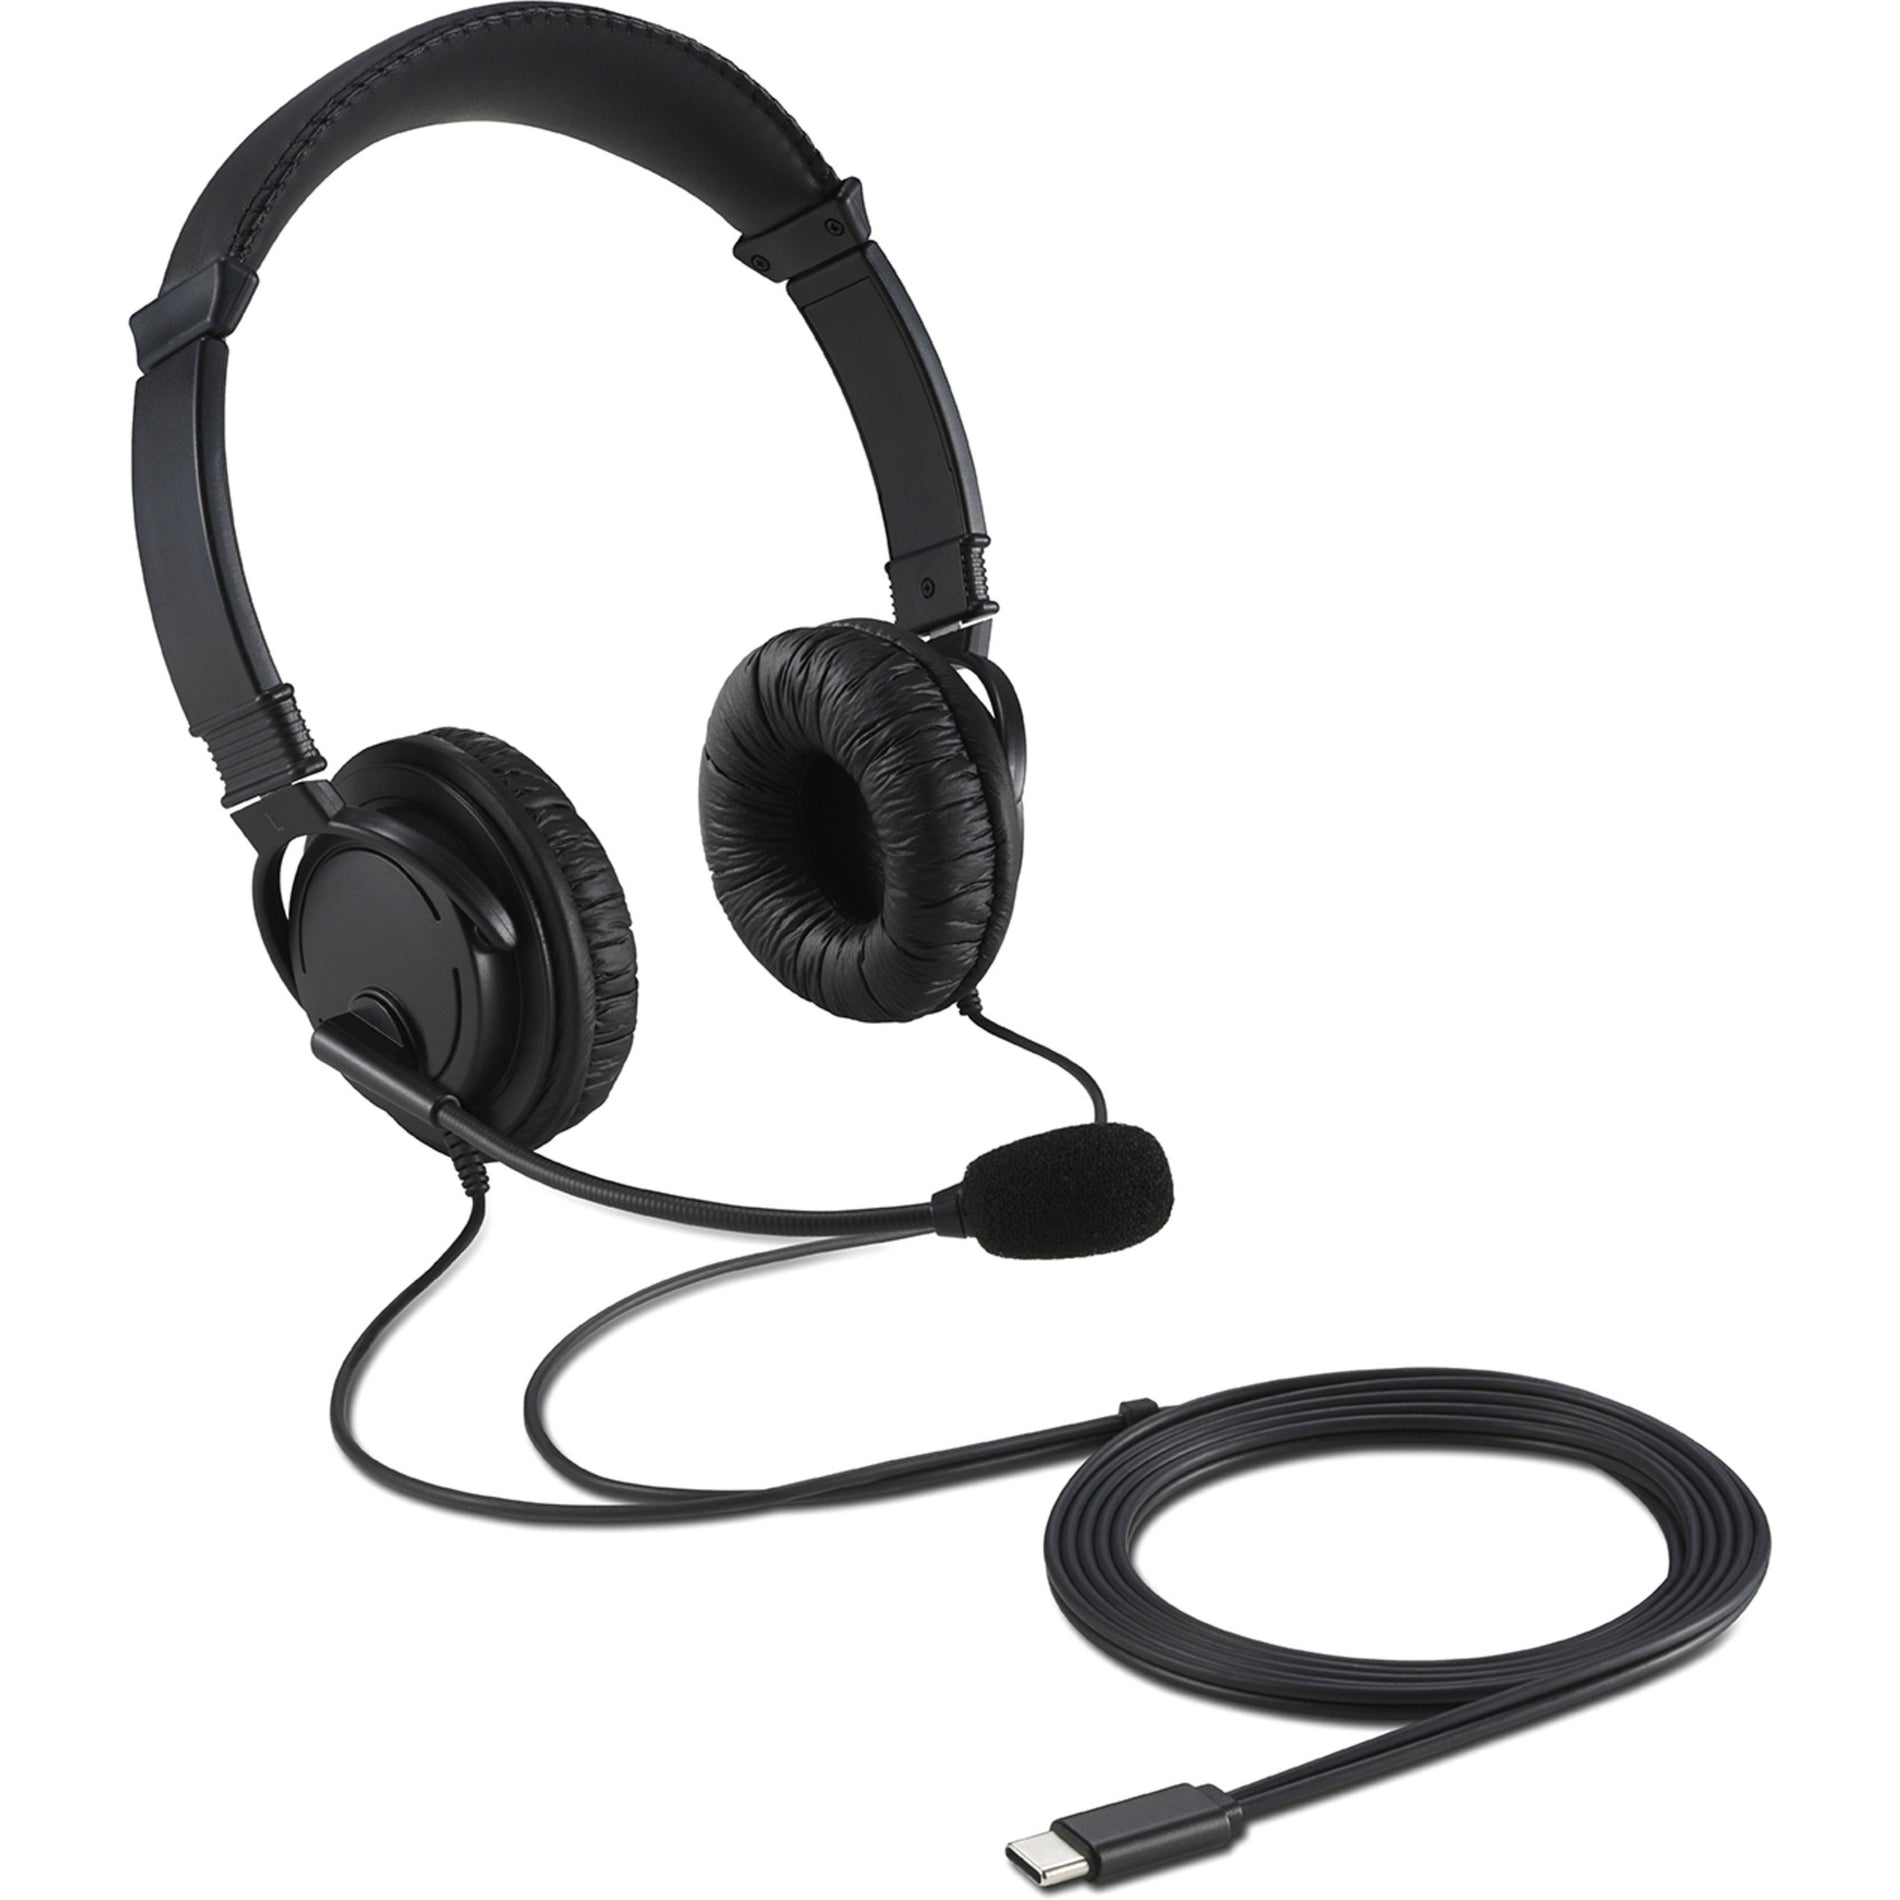 Kensington K97457WW Classic USB-C Headset with Mic, Comfortable, Noise Cancelling, 6 ft Cable Length